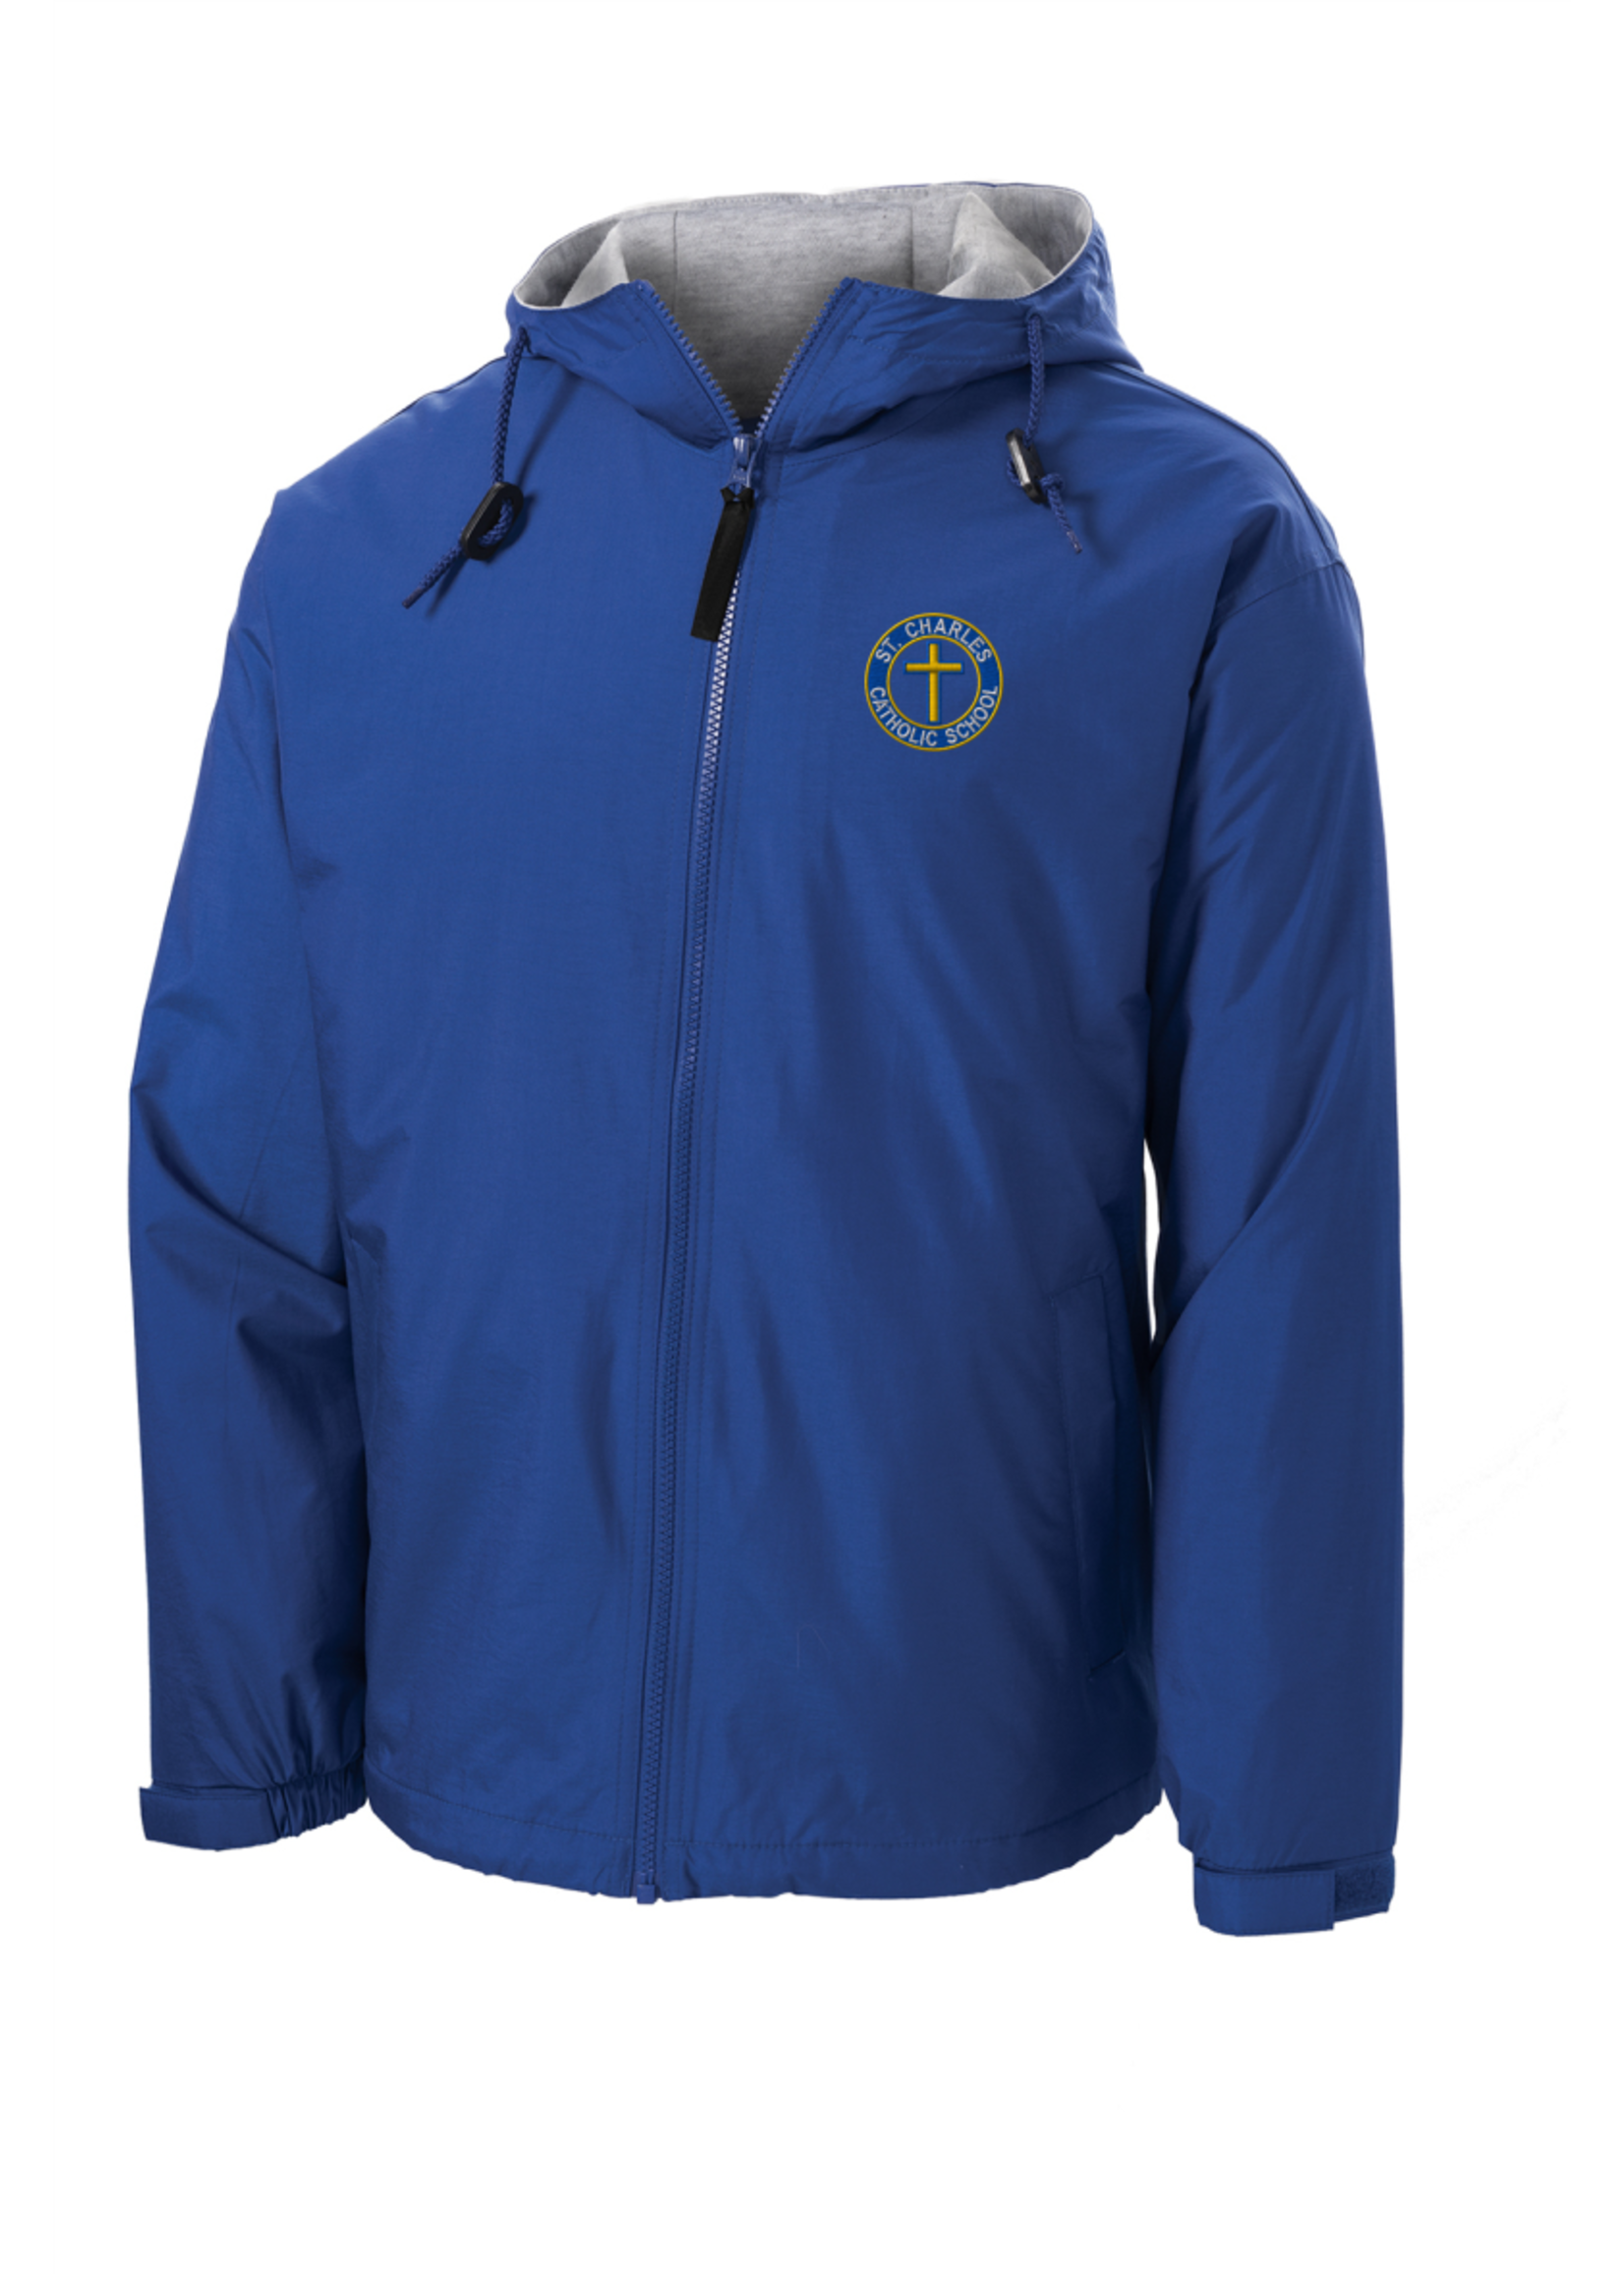 SCCS Royal Hooded Full Zip Baywatch Jacket